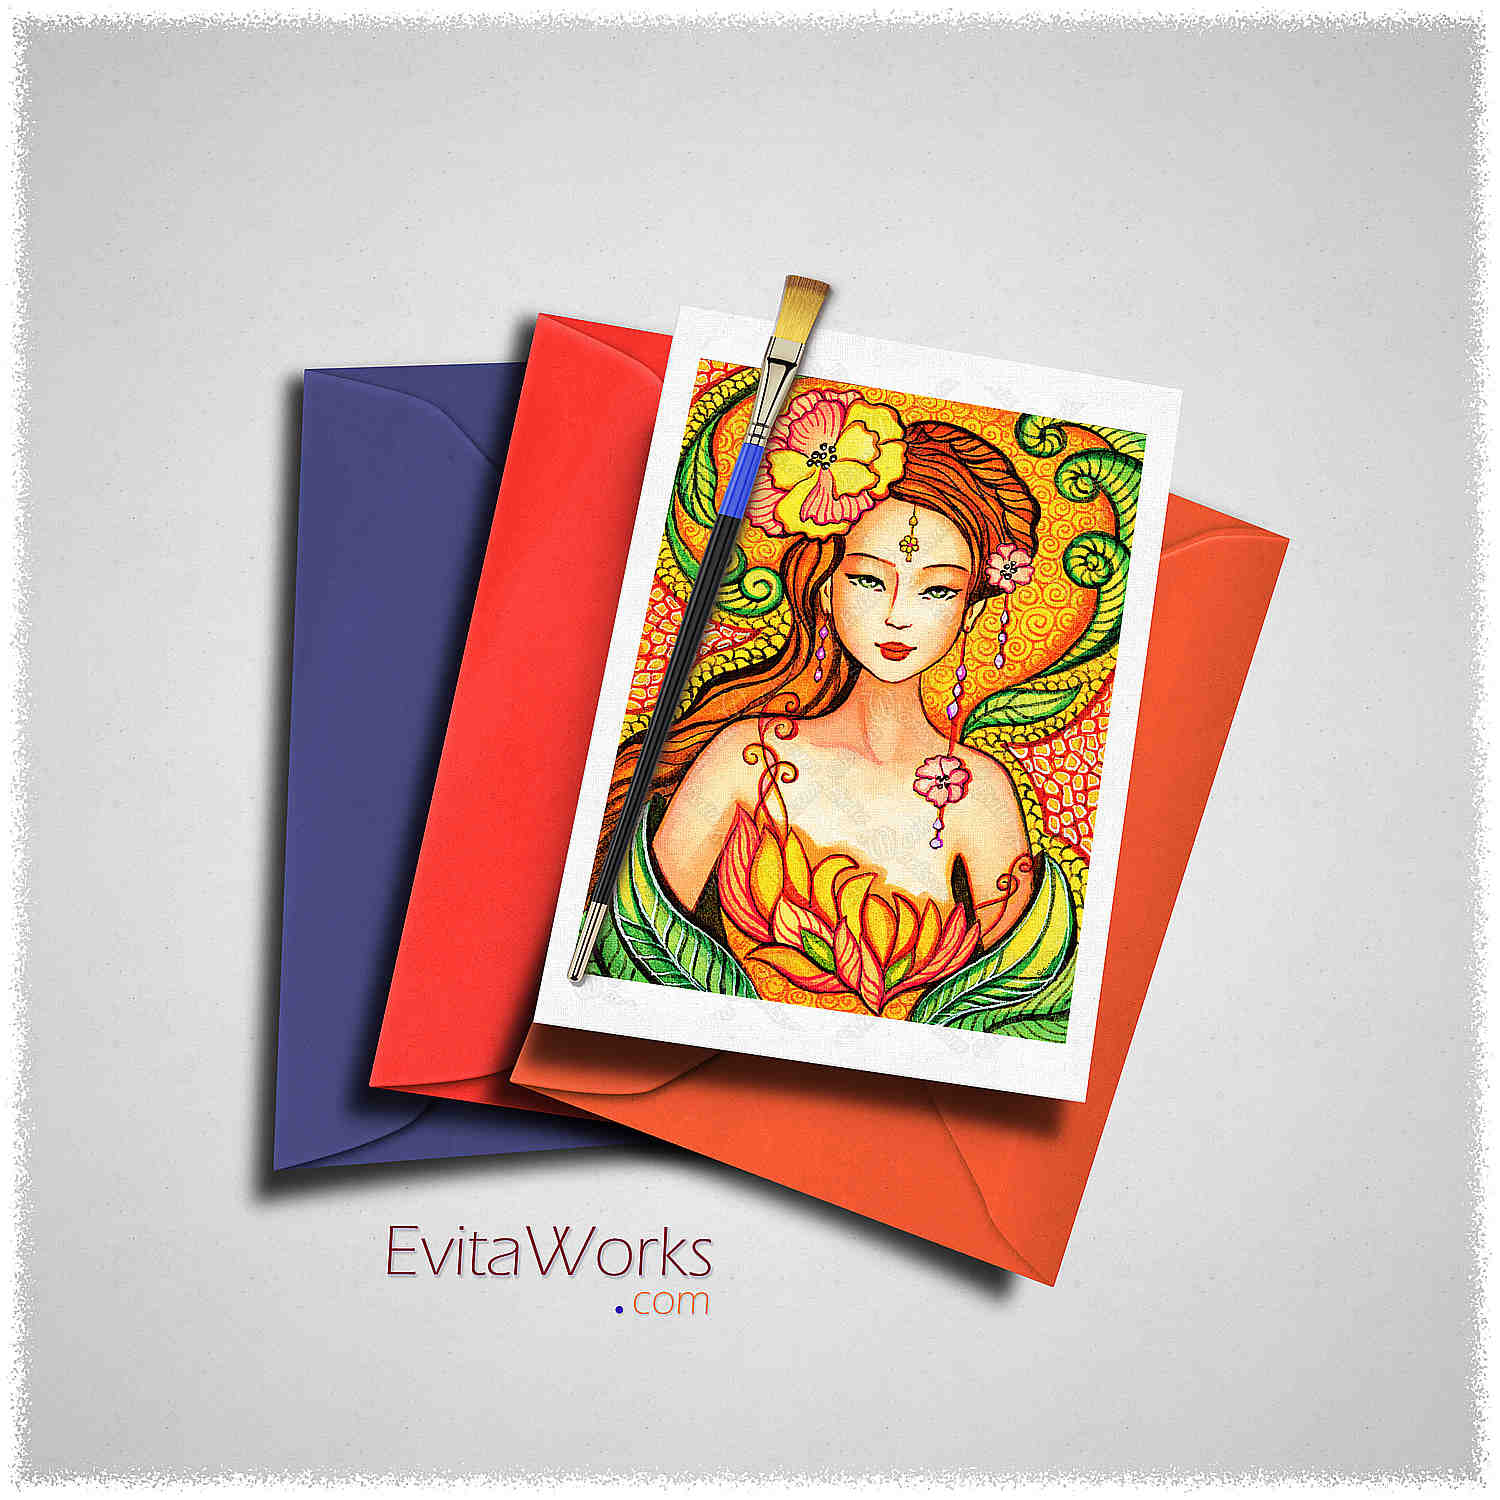 Hit to learn about "Asian Flower Mermaid, geisha in flower kimono" on cards